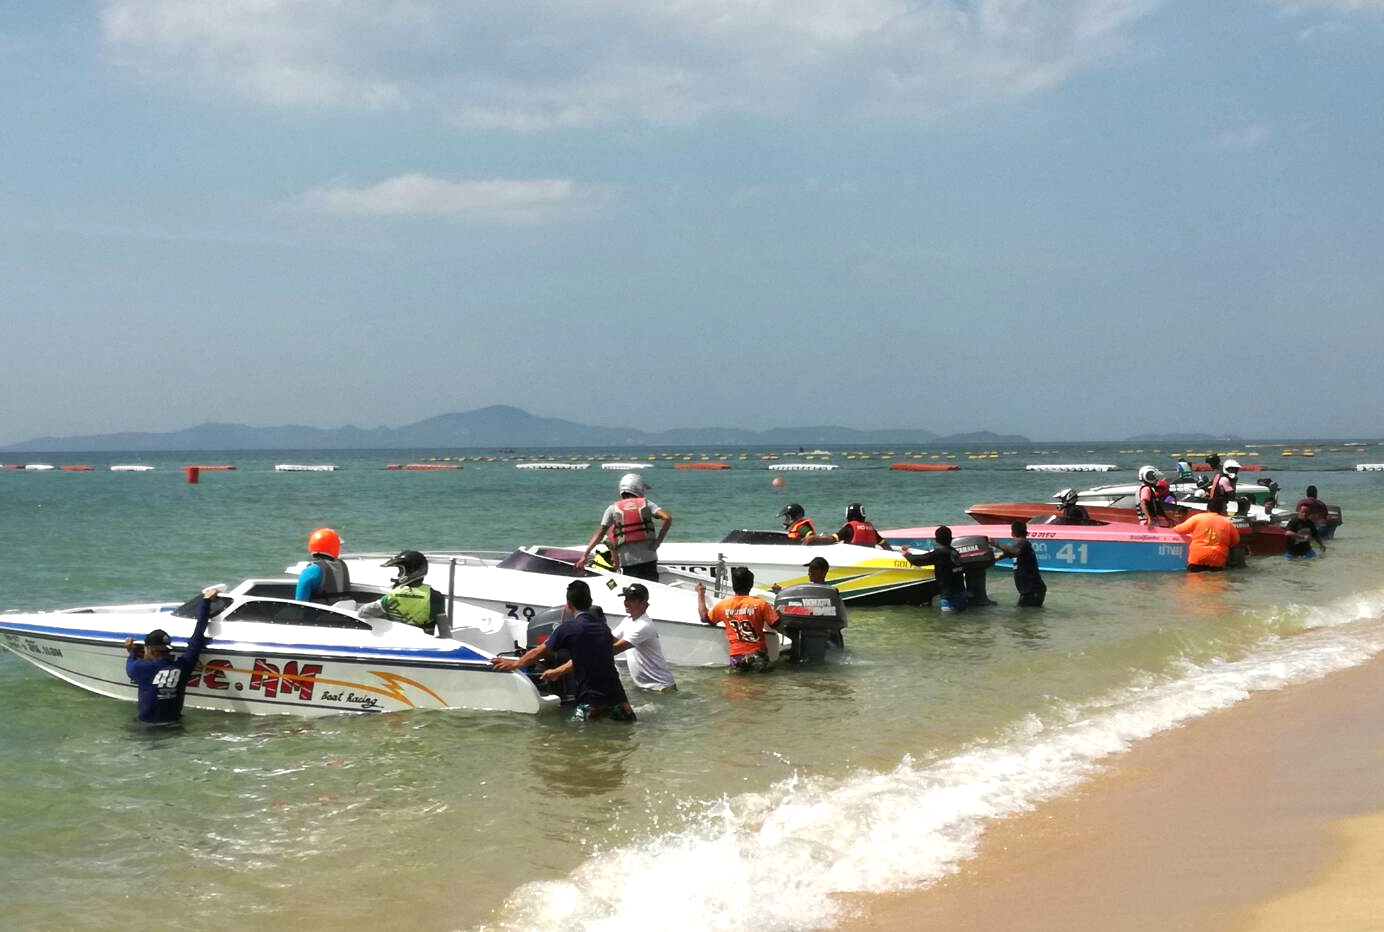 Boats line up on Jomtien beach at the start of another race.